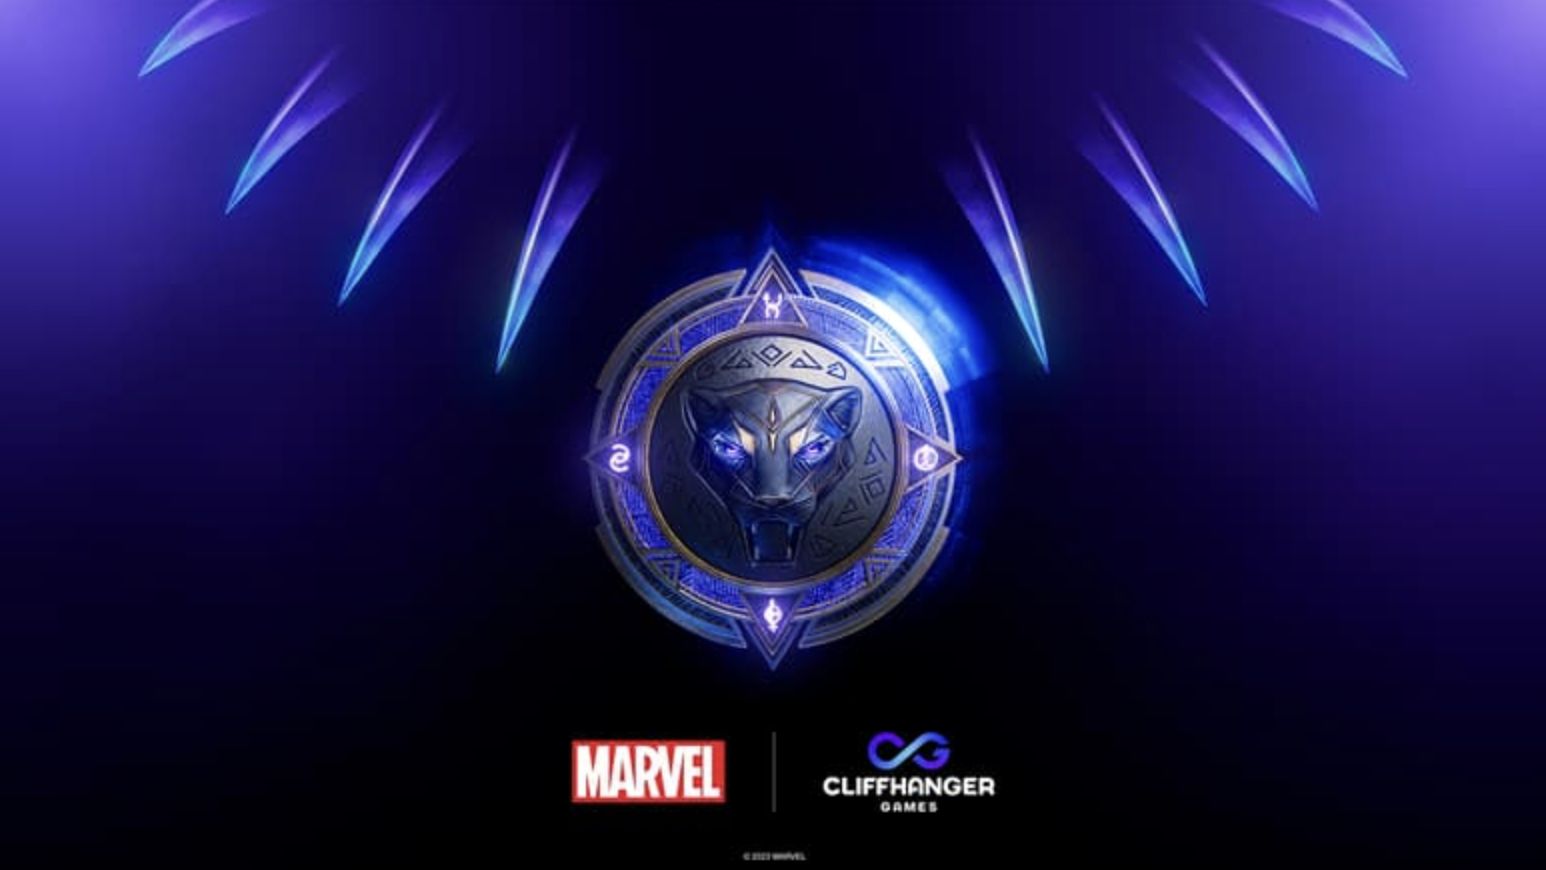 'Black Panther' Game From EA/Cliffhanger Games Confirmed